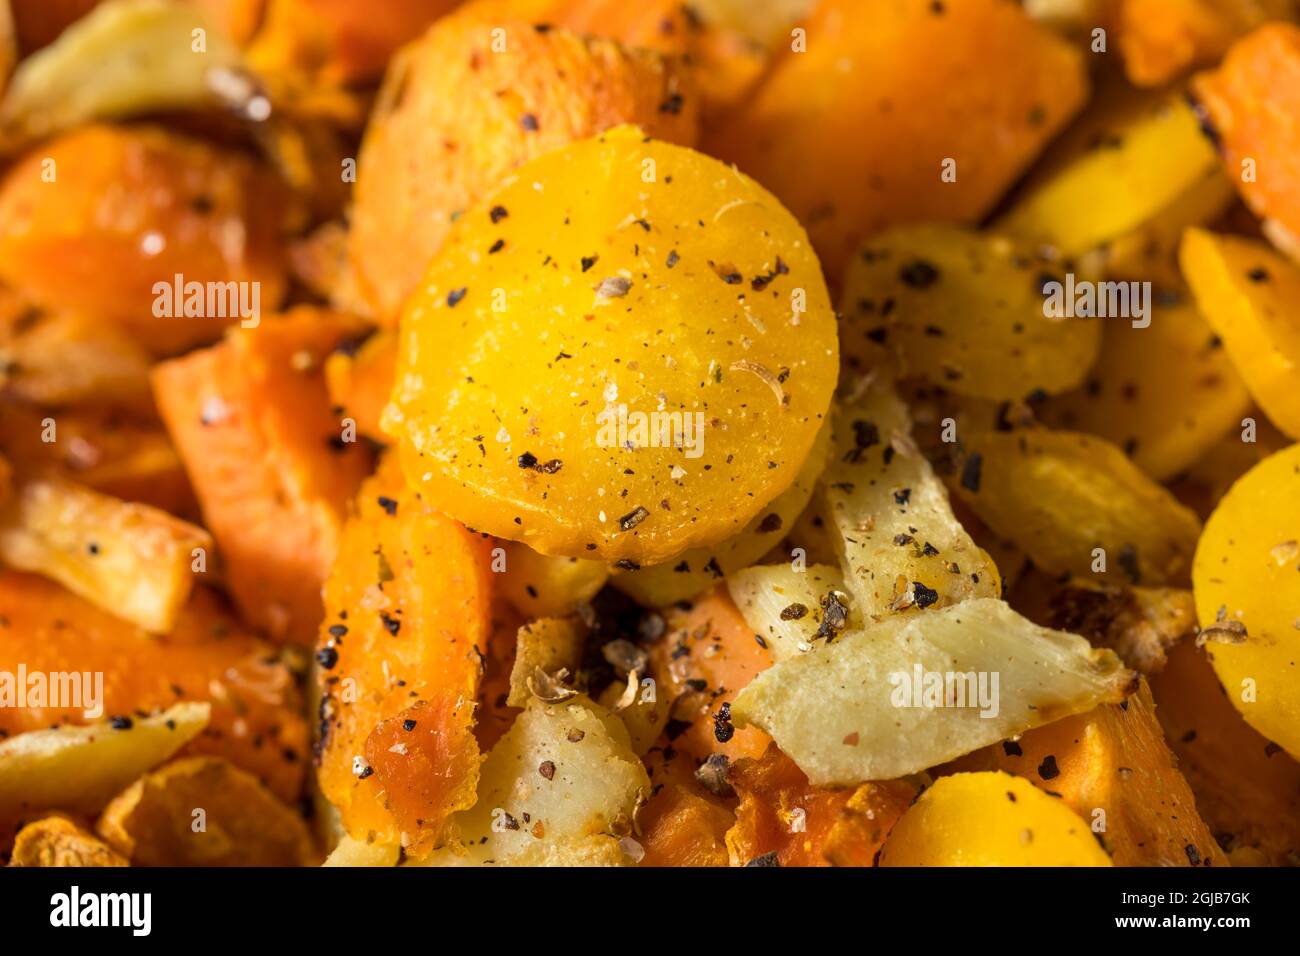 Healthy Roasted Potato Root Vegetables with Parsnips and Carrots Stock Photo